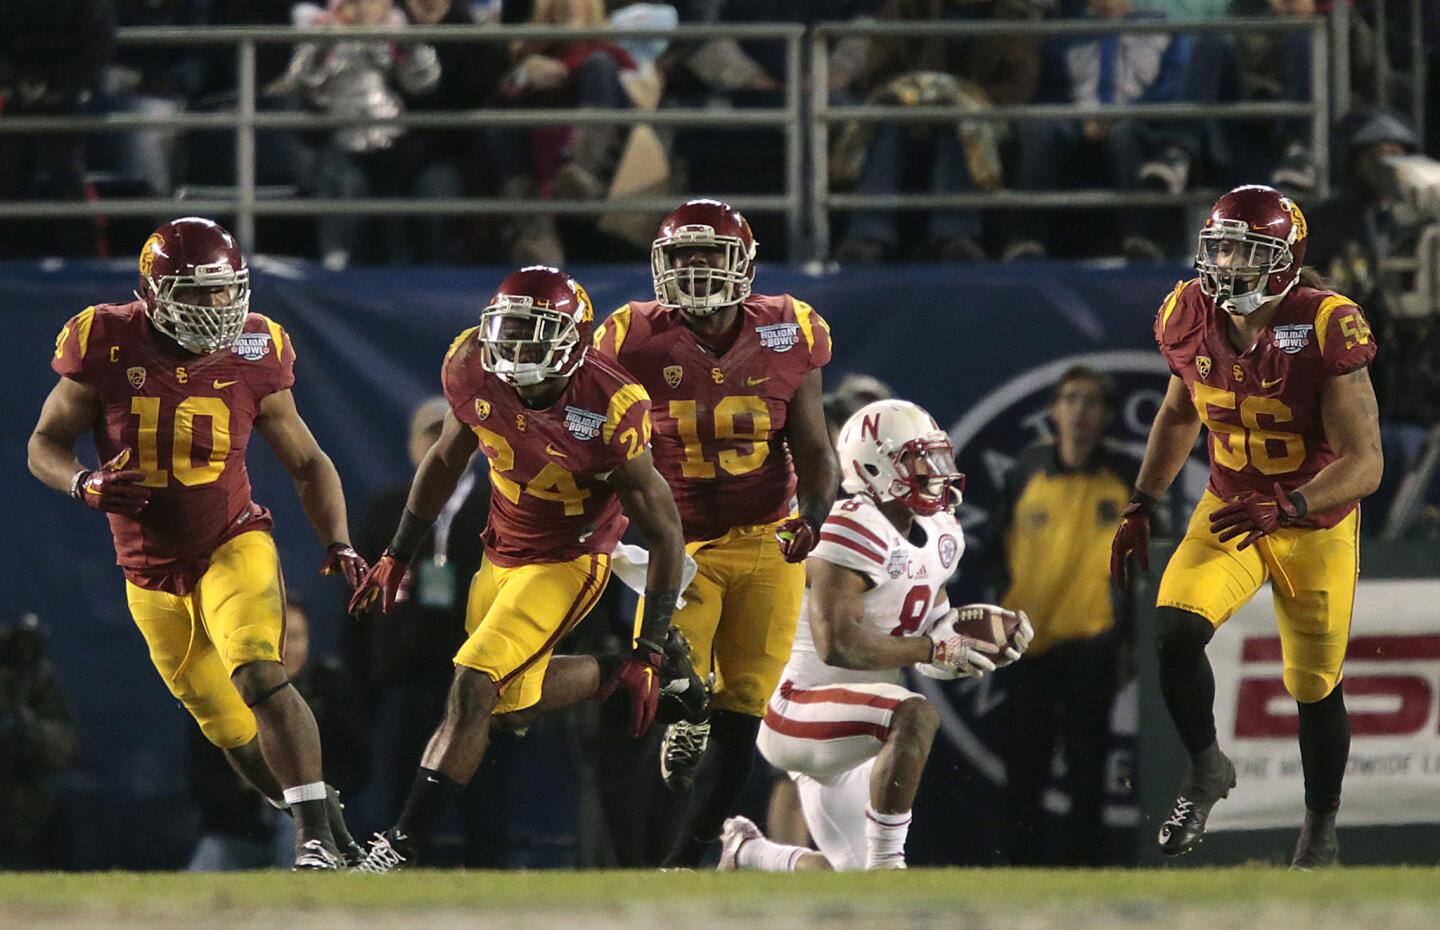 USC players celebrate after defensive back Leon McQuay (24) stopped Nebraska running back Ameer Abdullah behind the line of scrimmage on a fourth-down play with 2 1/2 minutes left in the fourth quarter.